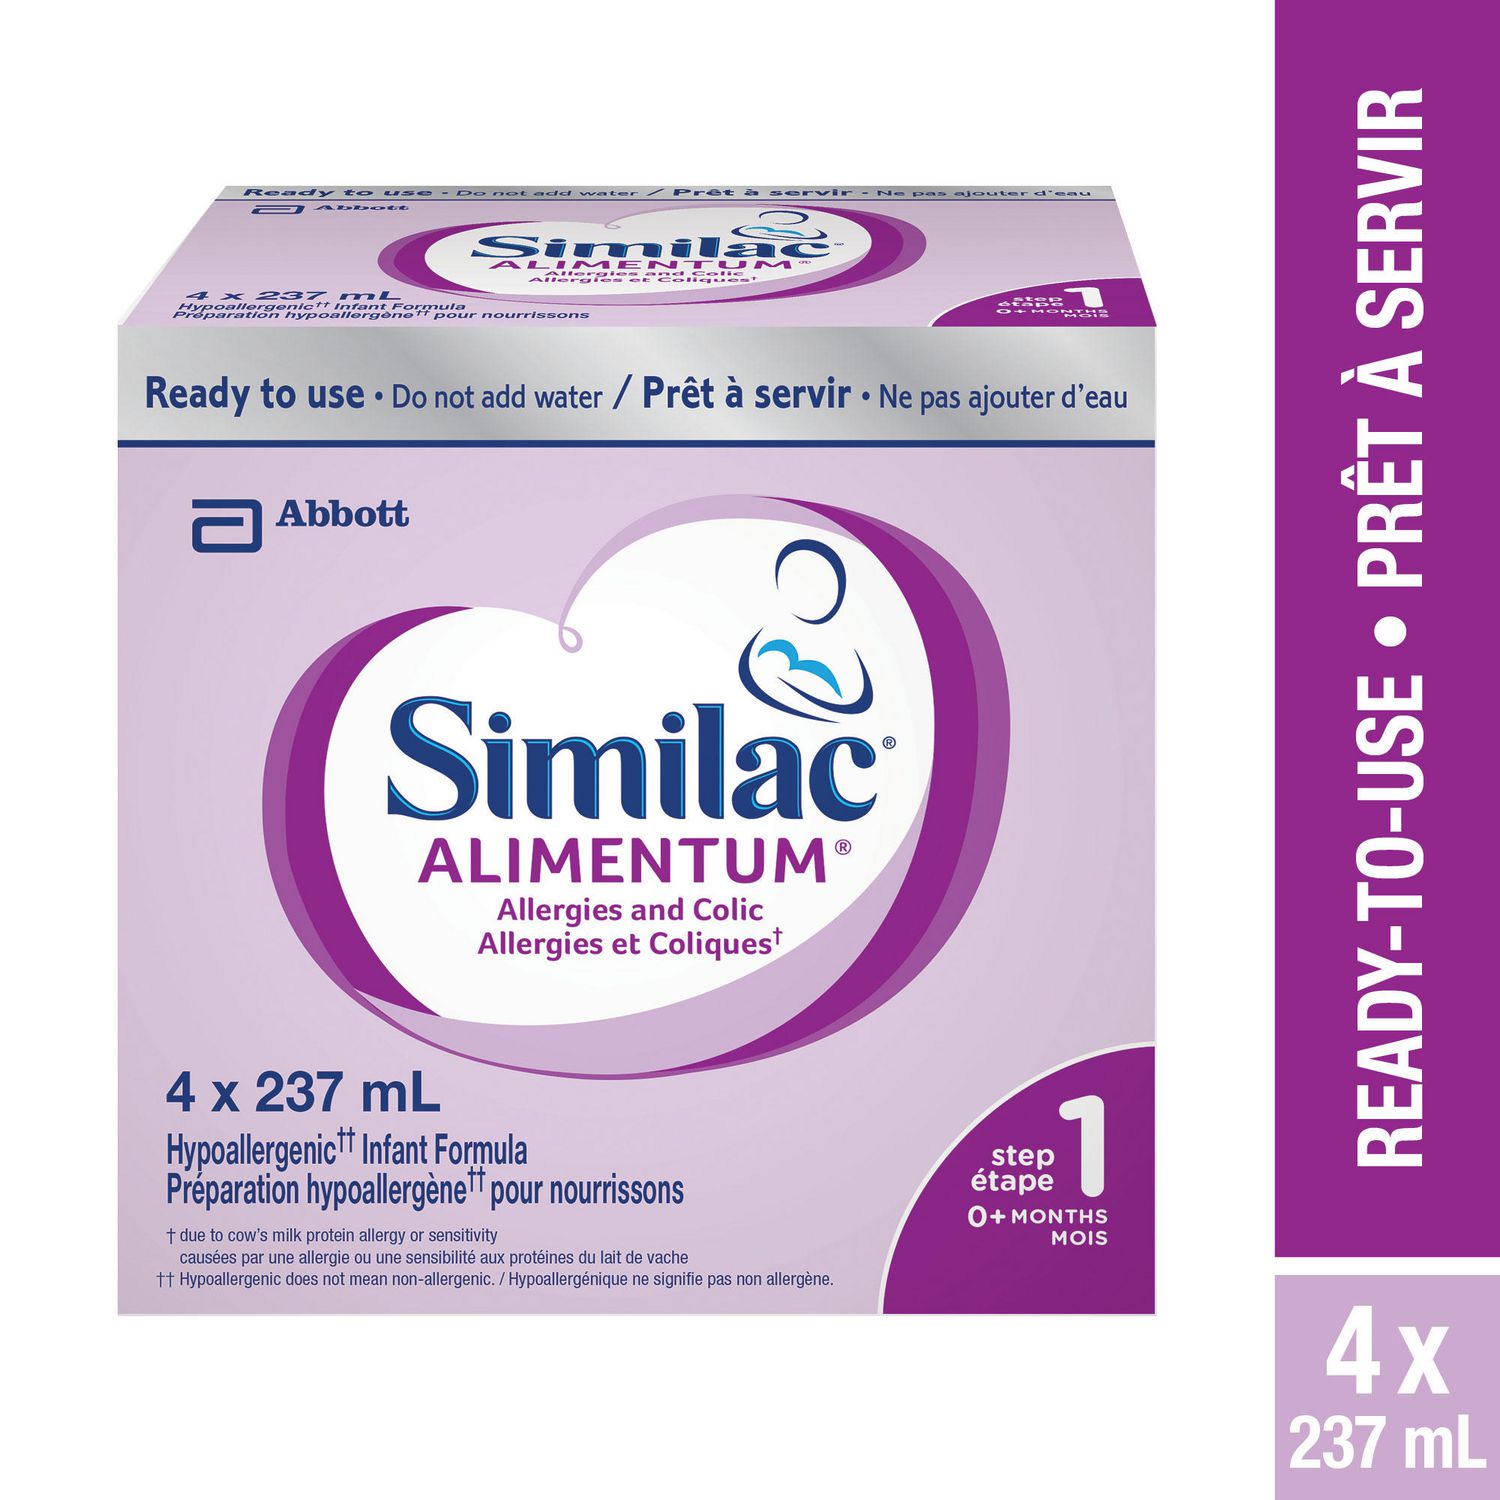 similac alimentum ready to use